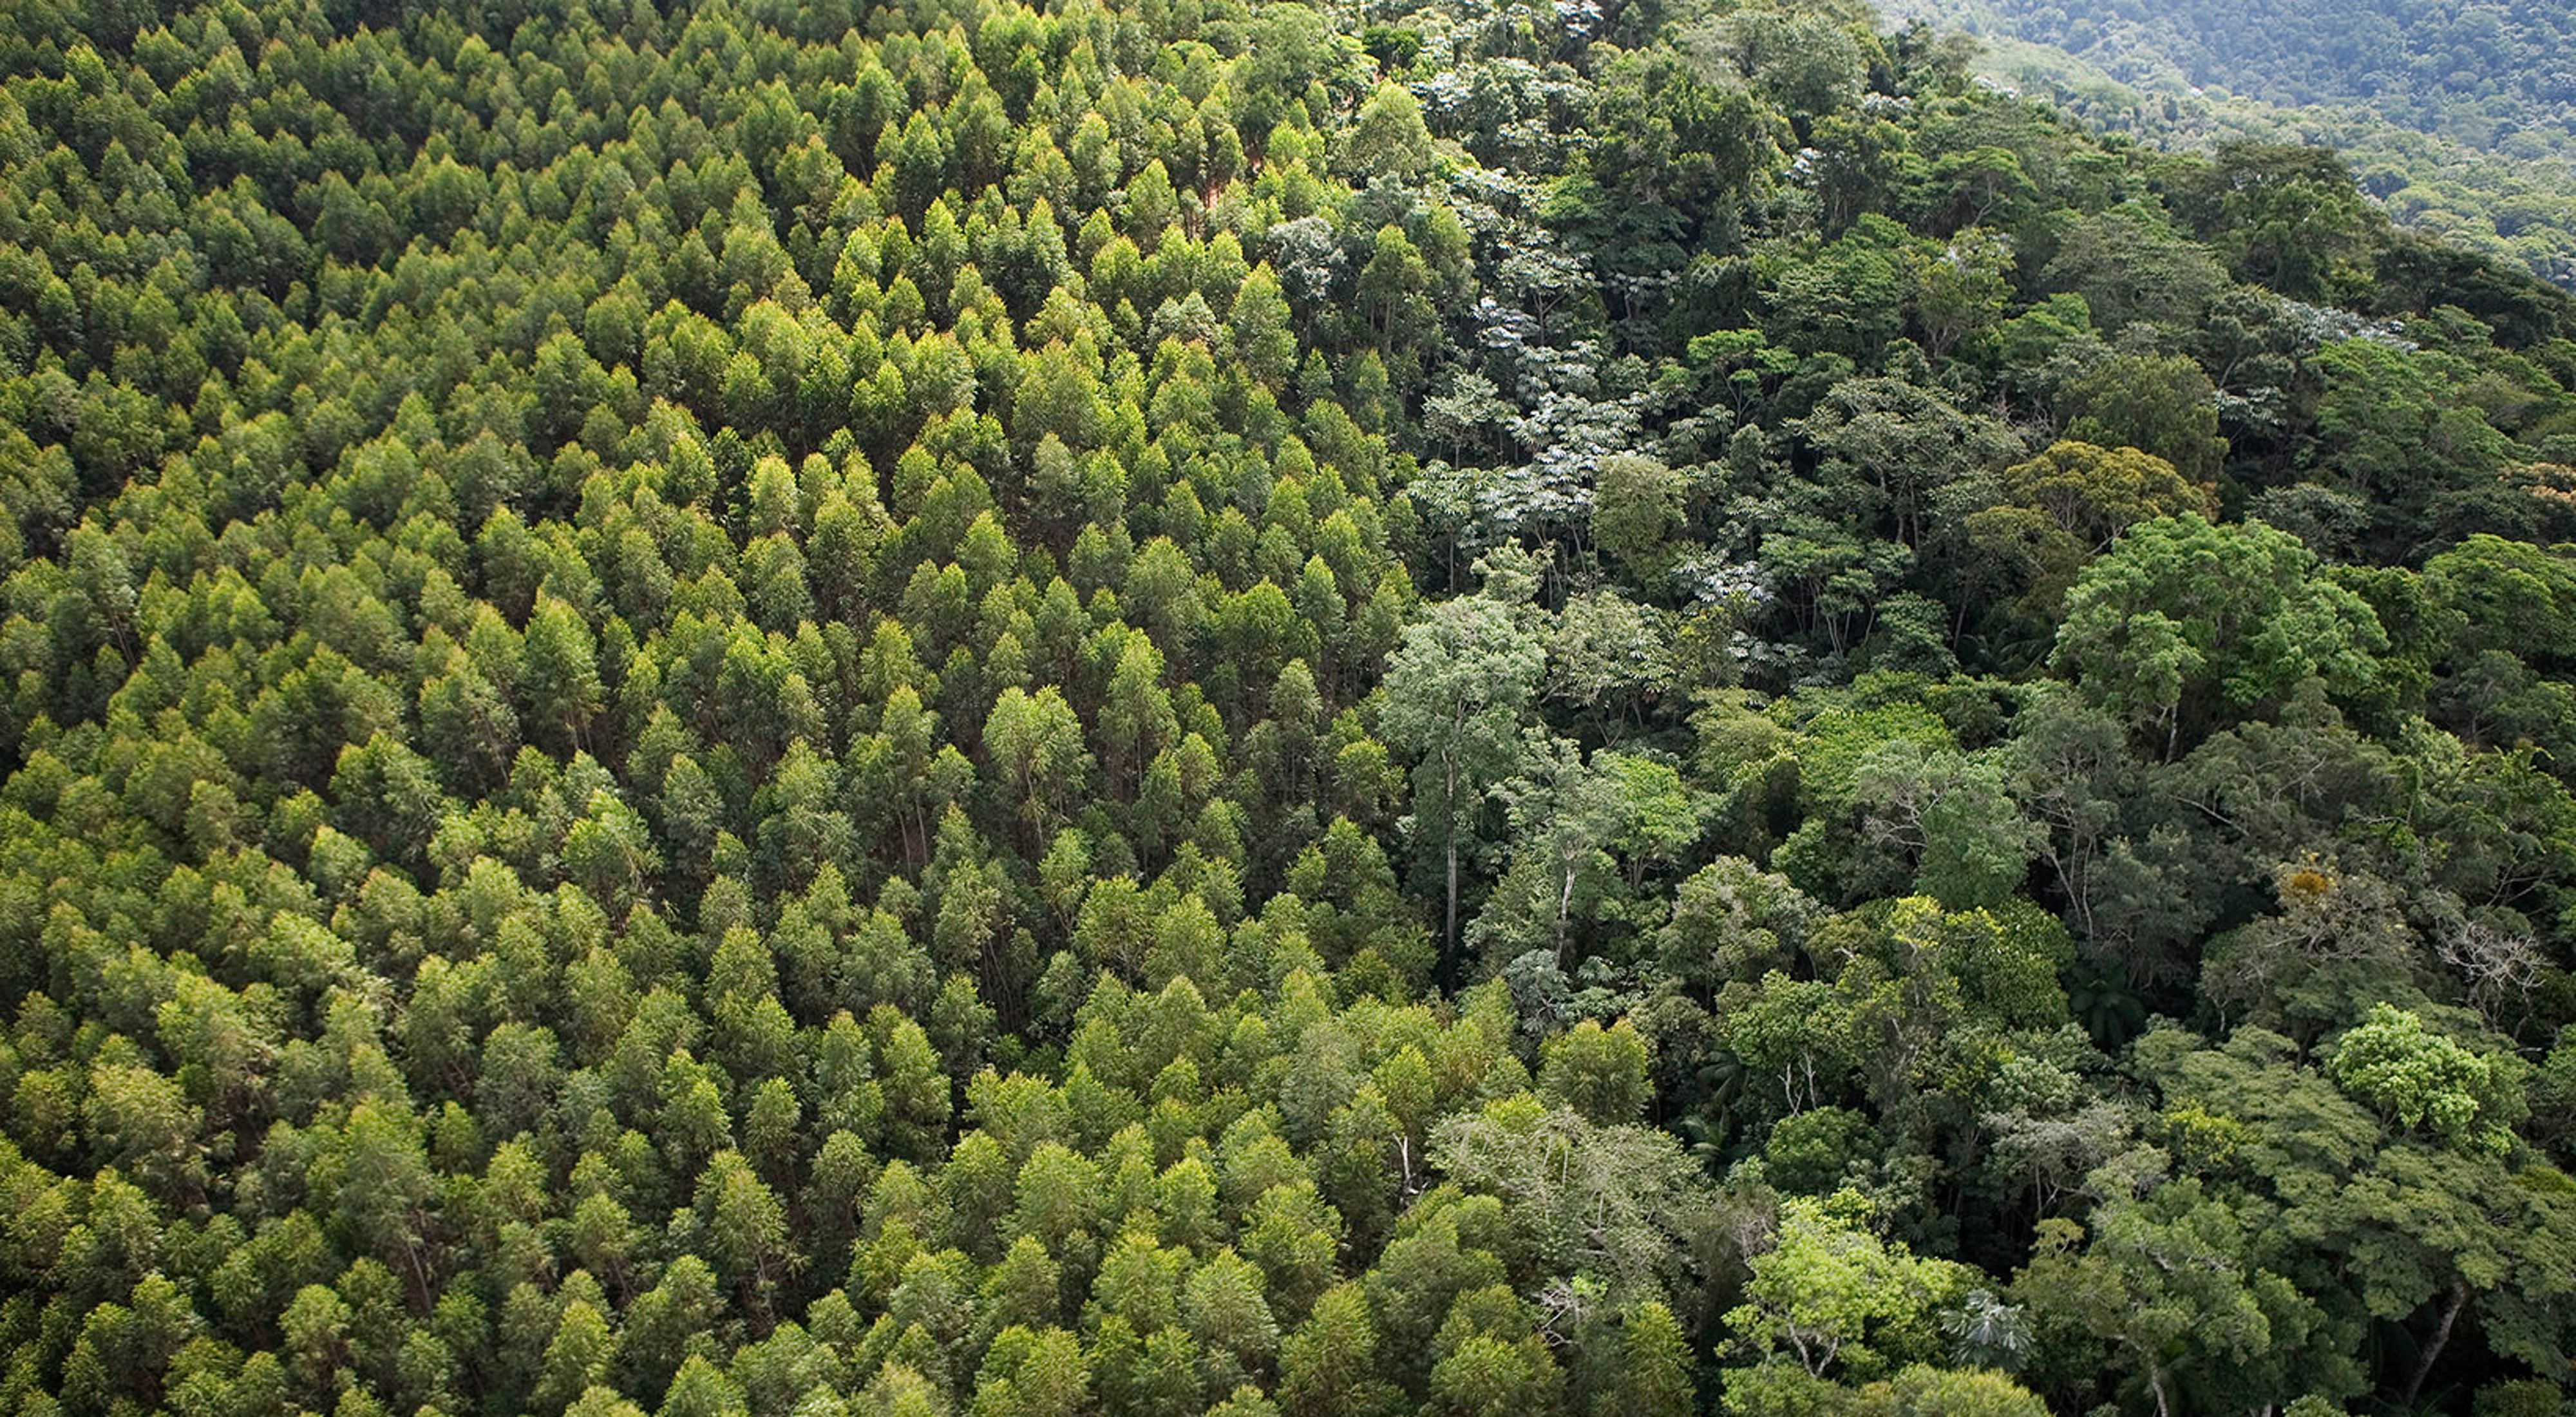 Aerial view of contrasting forest of planted eucalyptus (on left) and natural forest; near the Cachoeira Reservoir.